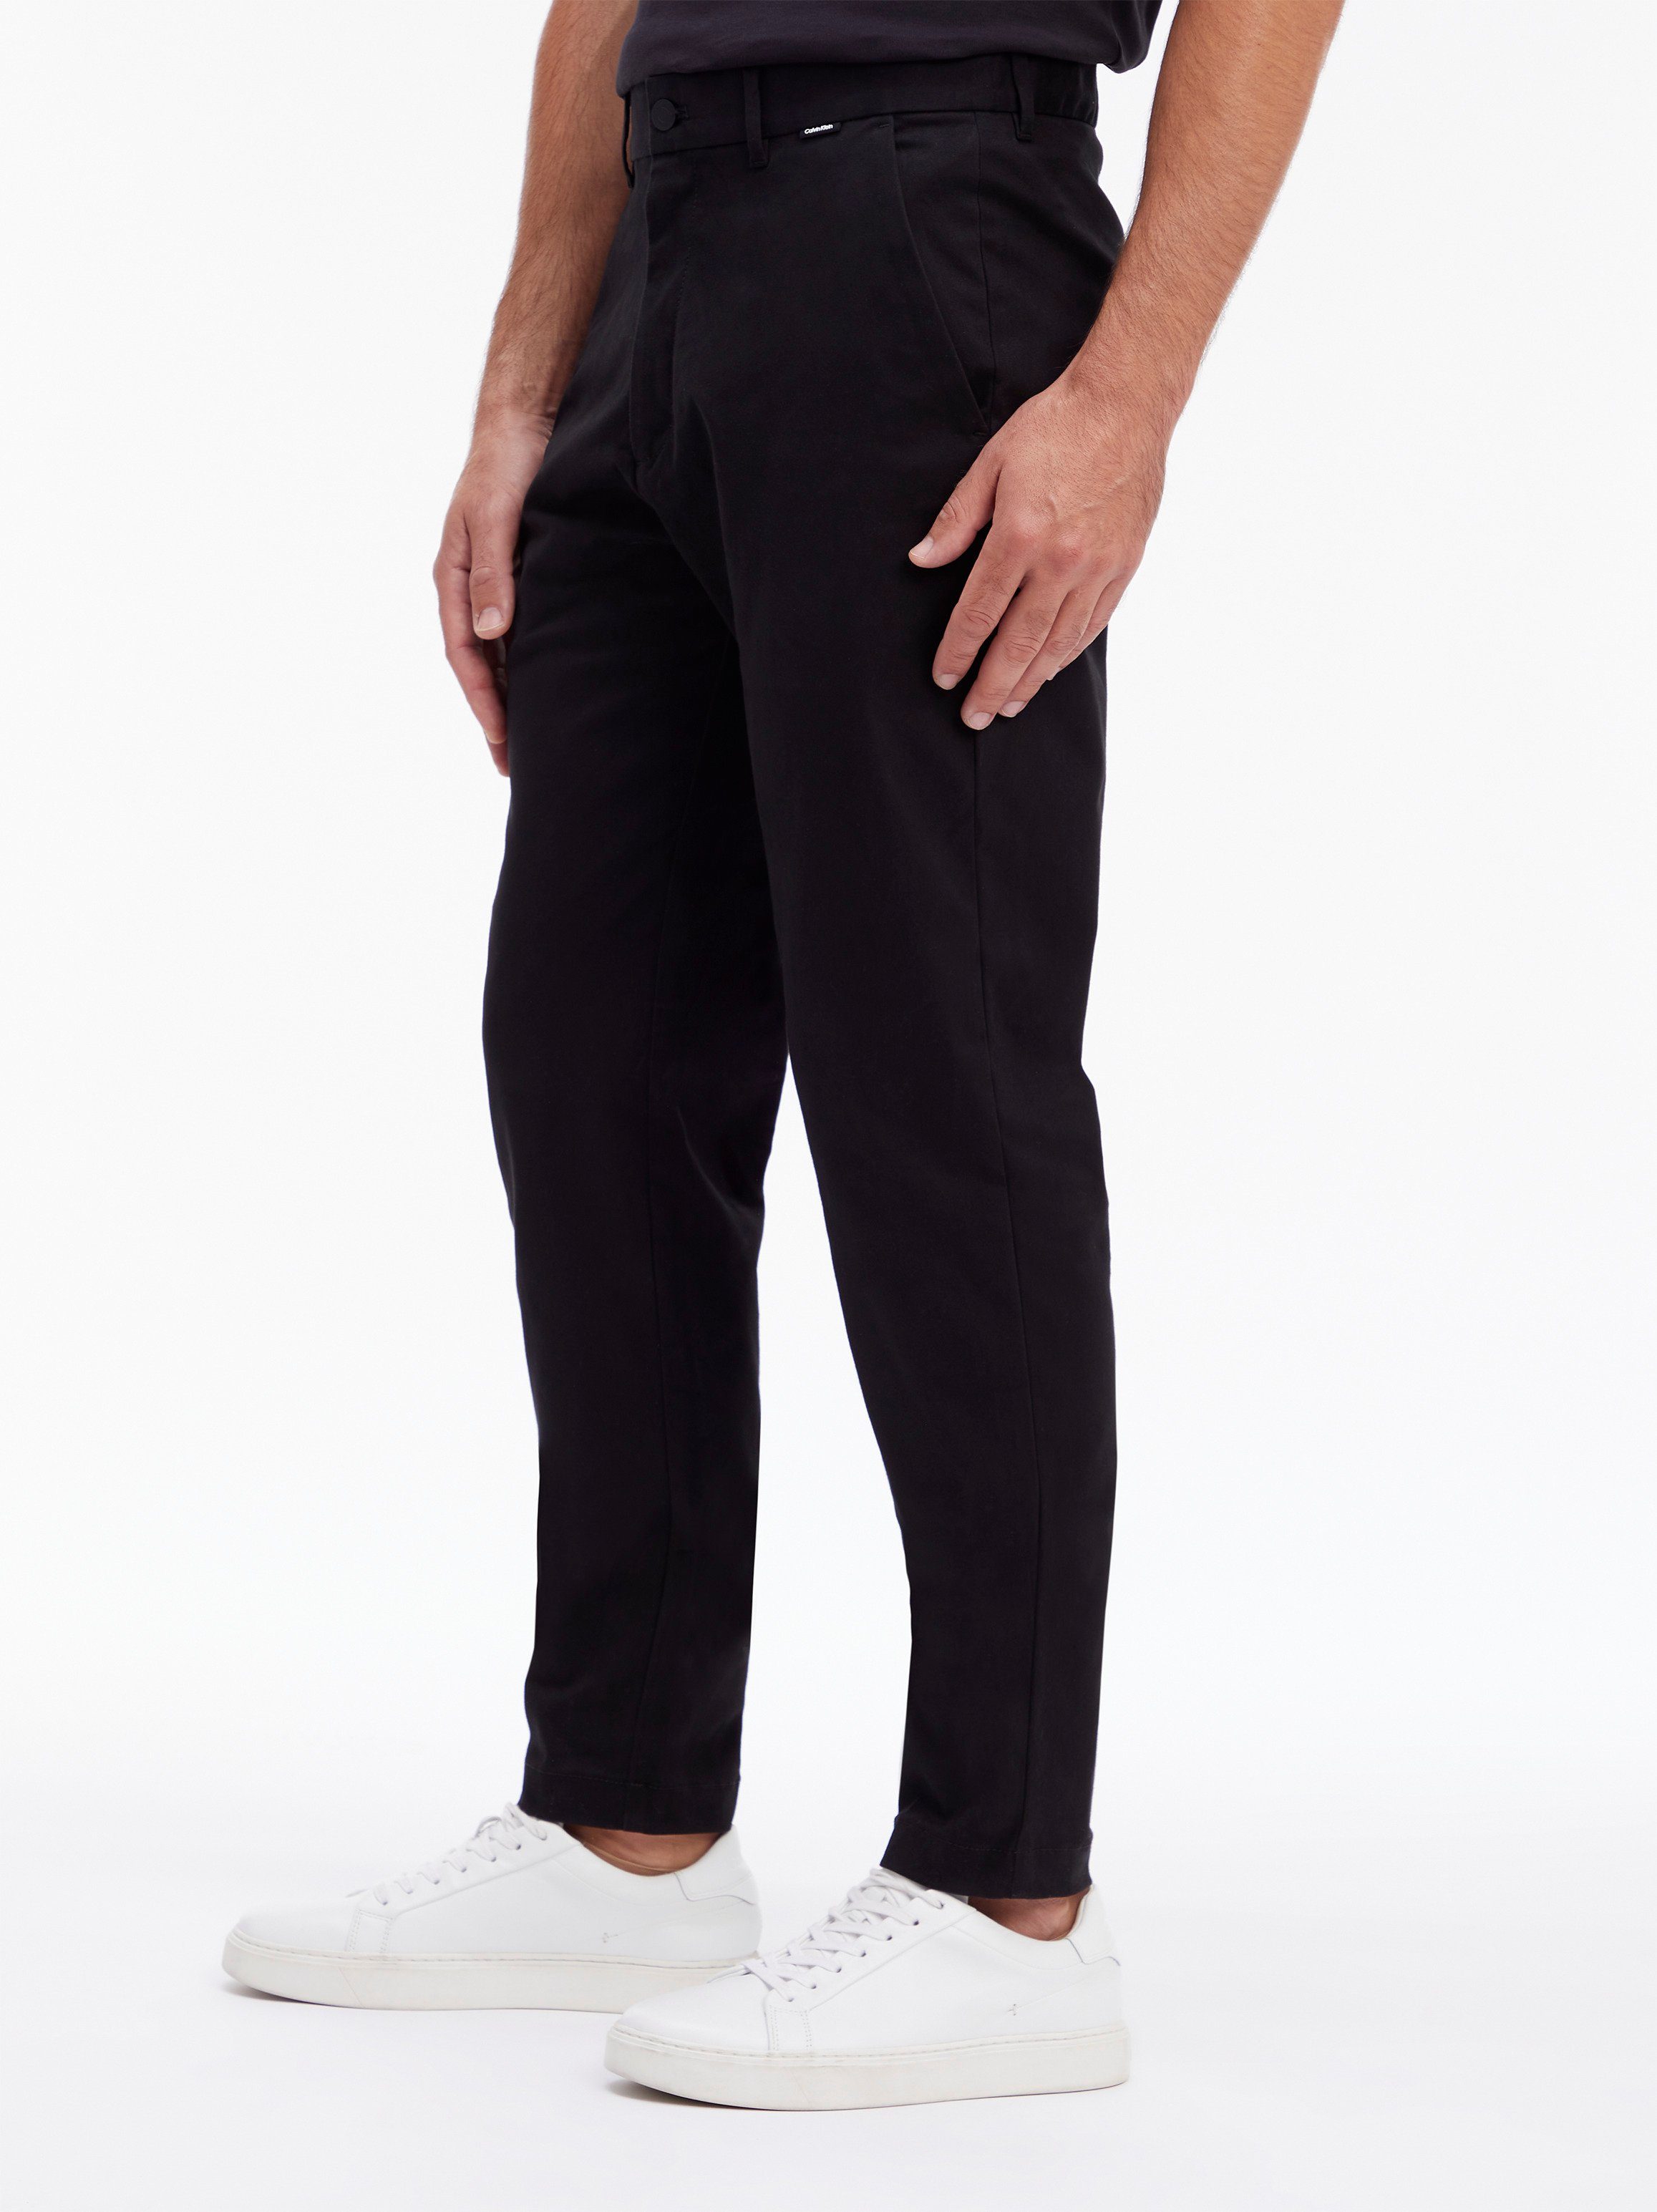 Klein MODERN Calvin TAPERED Stretch-Hose TWILL PANT